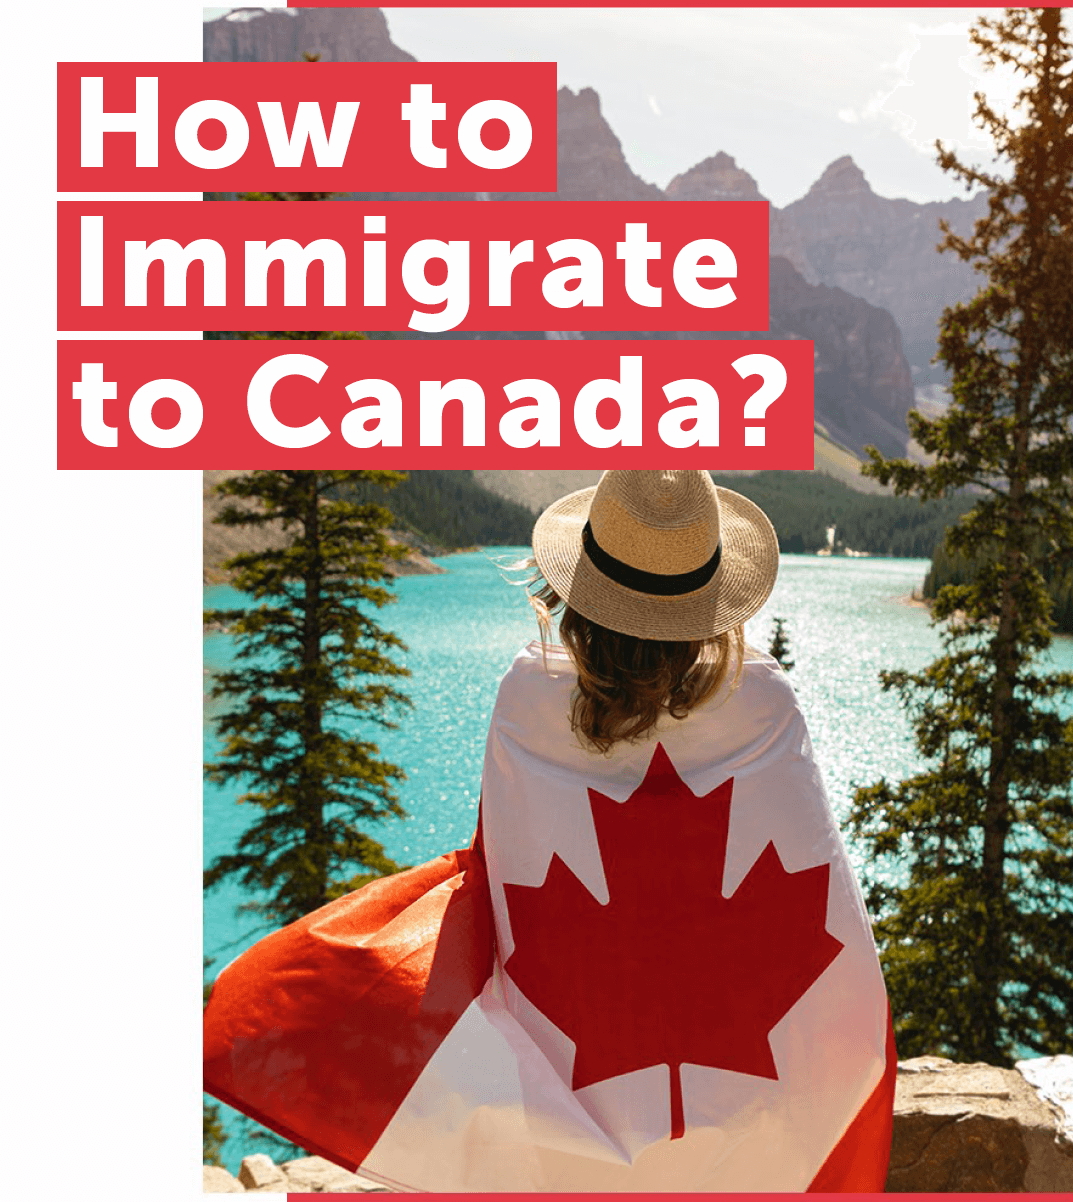 6 Fastest Ways To Immigrate to Canada